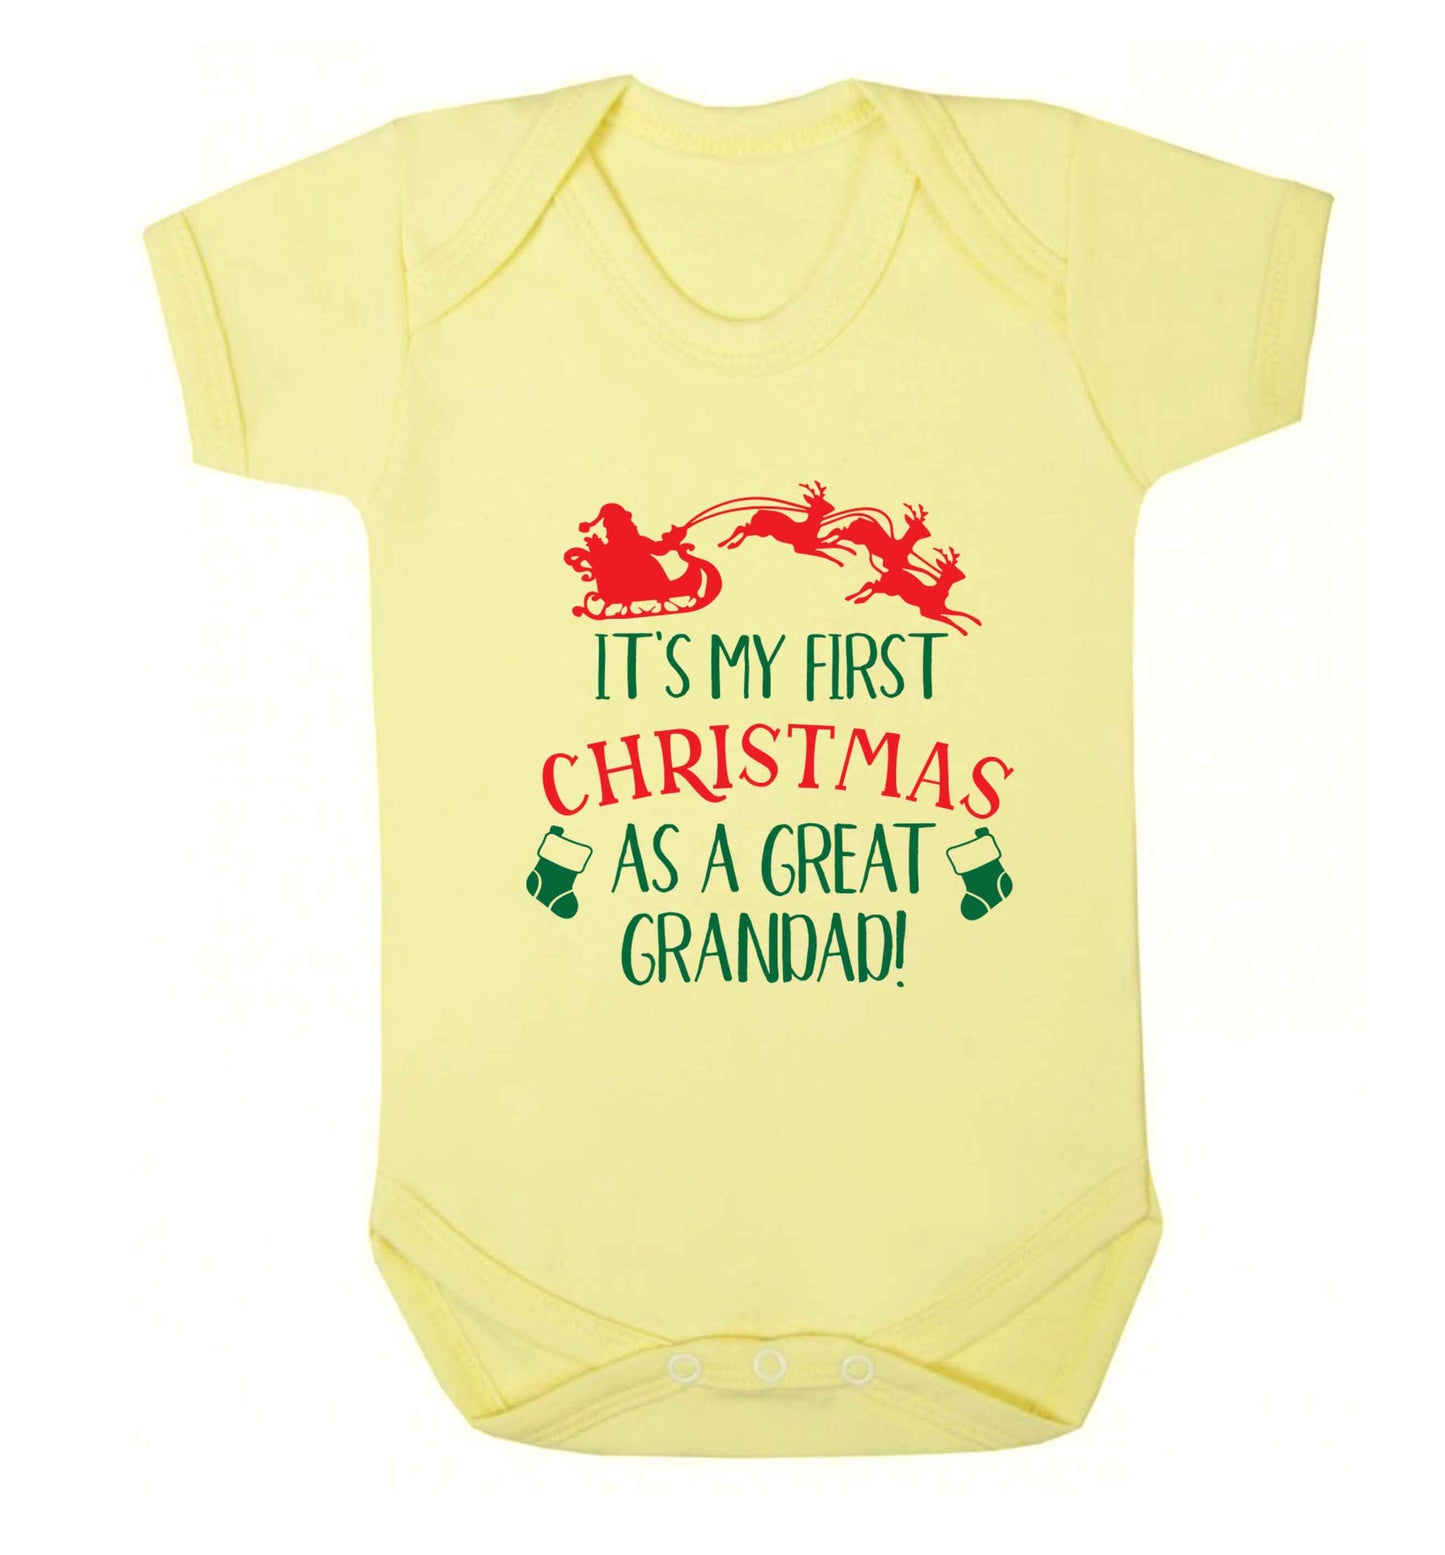 It's my first Christmas as a great grandad! Baby Vest pale yellow 18-24 months